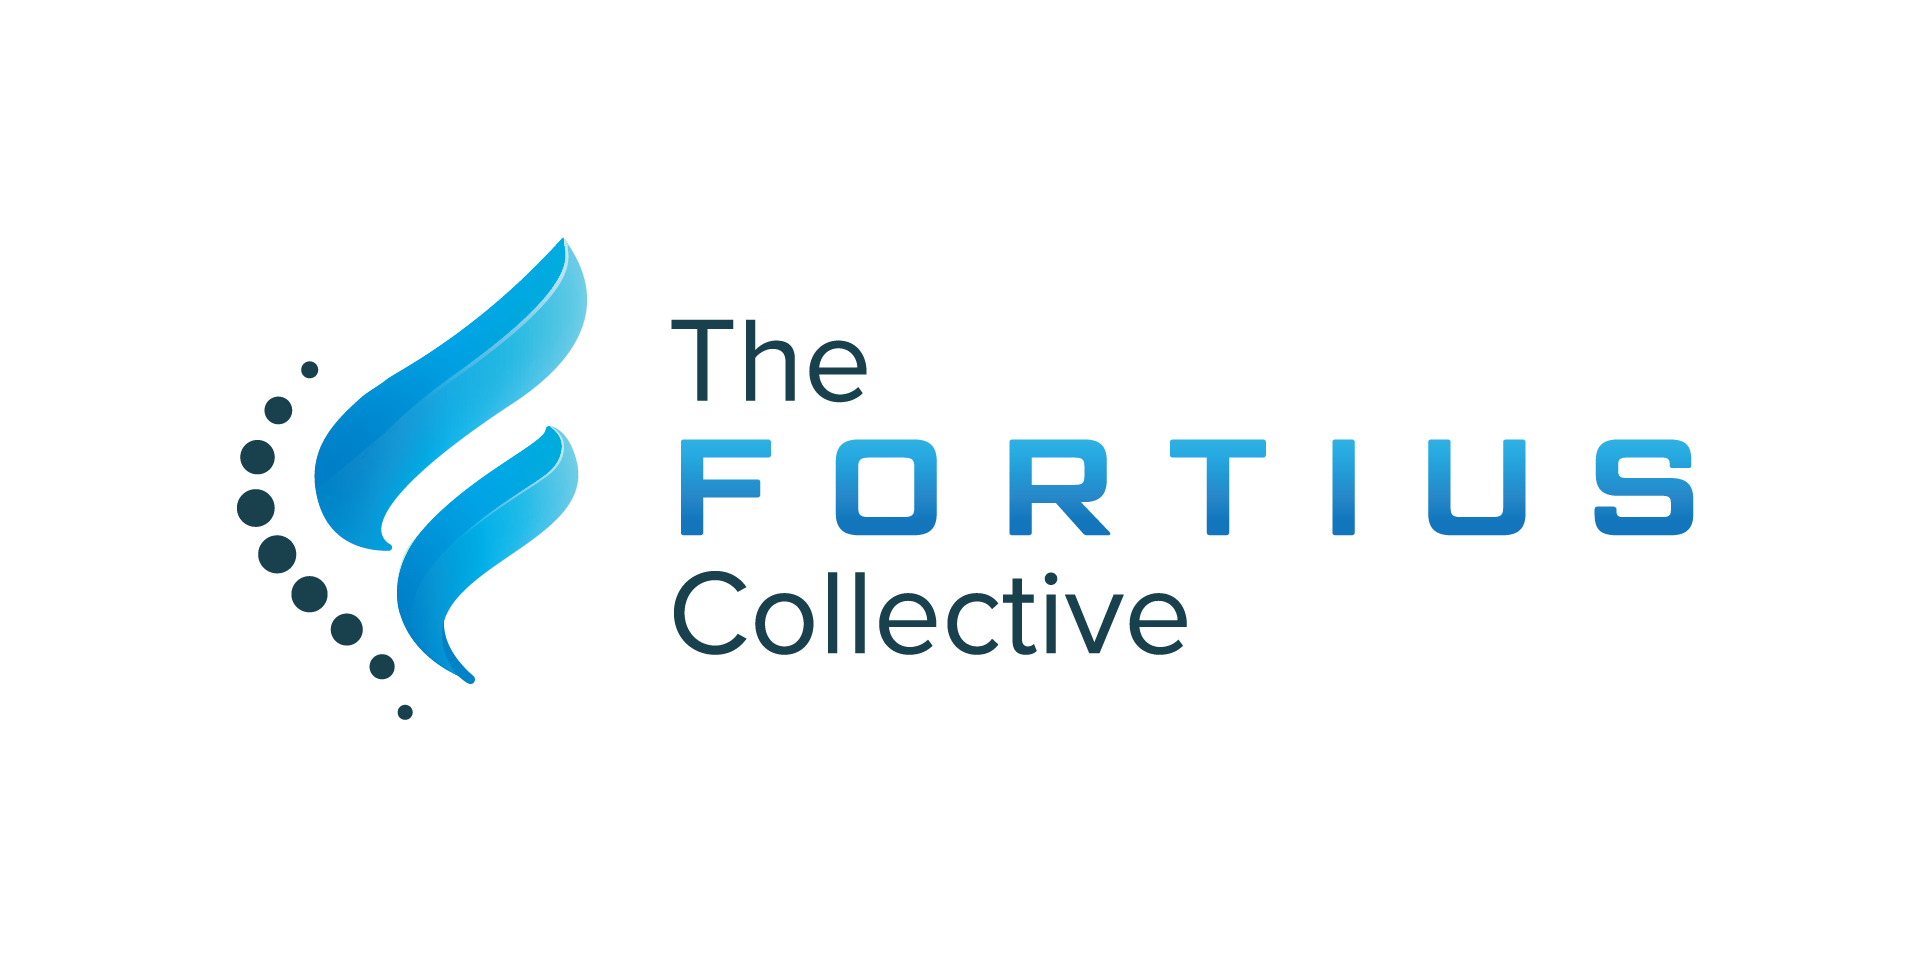 The Fortius Collective